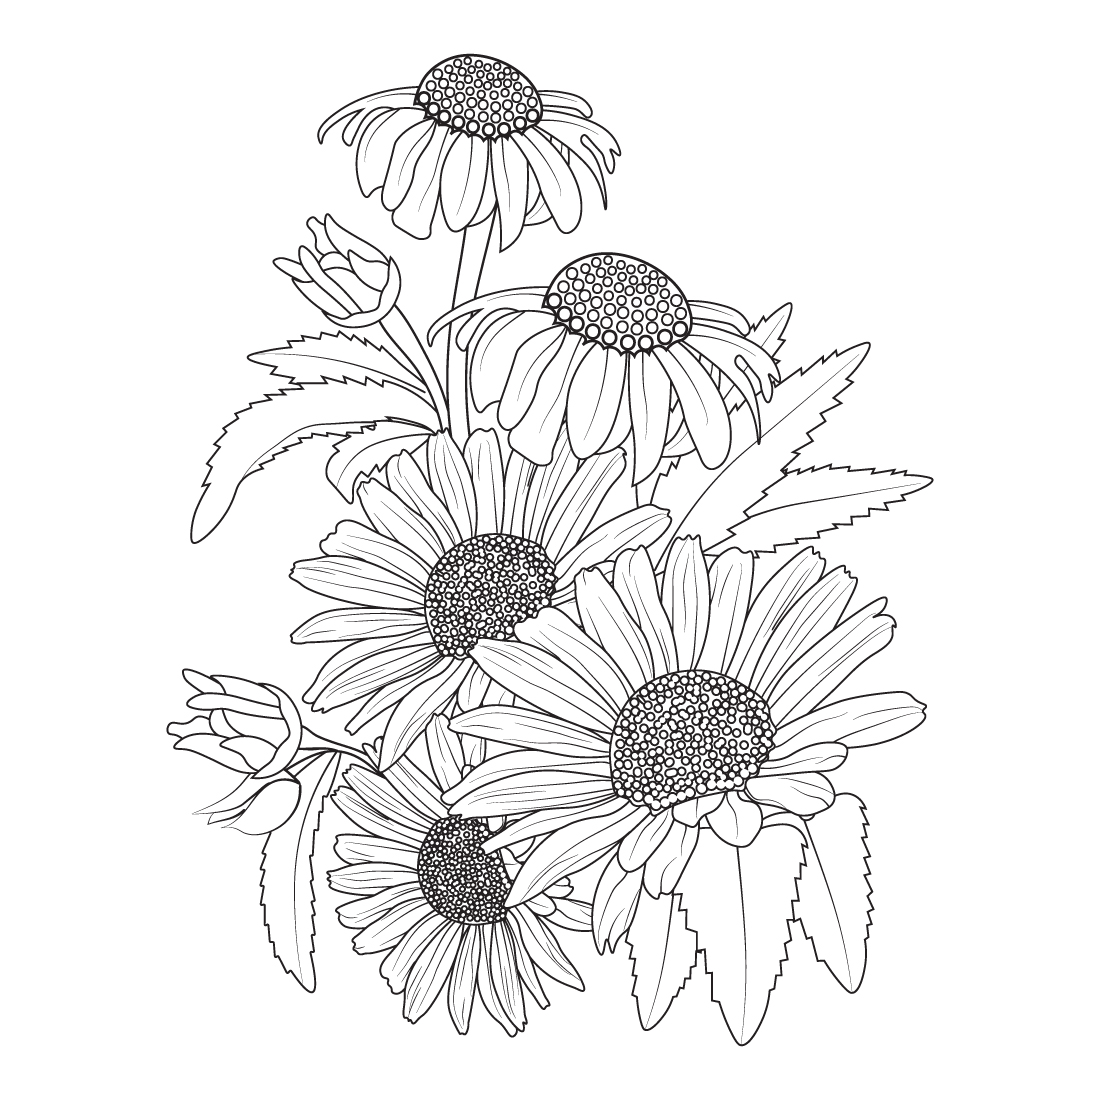 Daisy flower coloring pages, daisy flower bouquet tattoo, small daisy tattoo, elegant minimalist daisy tattoo, cover image.